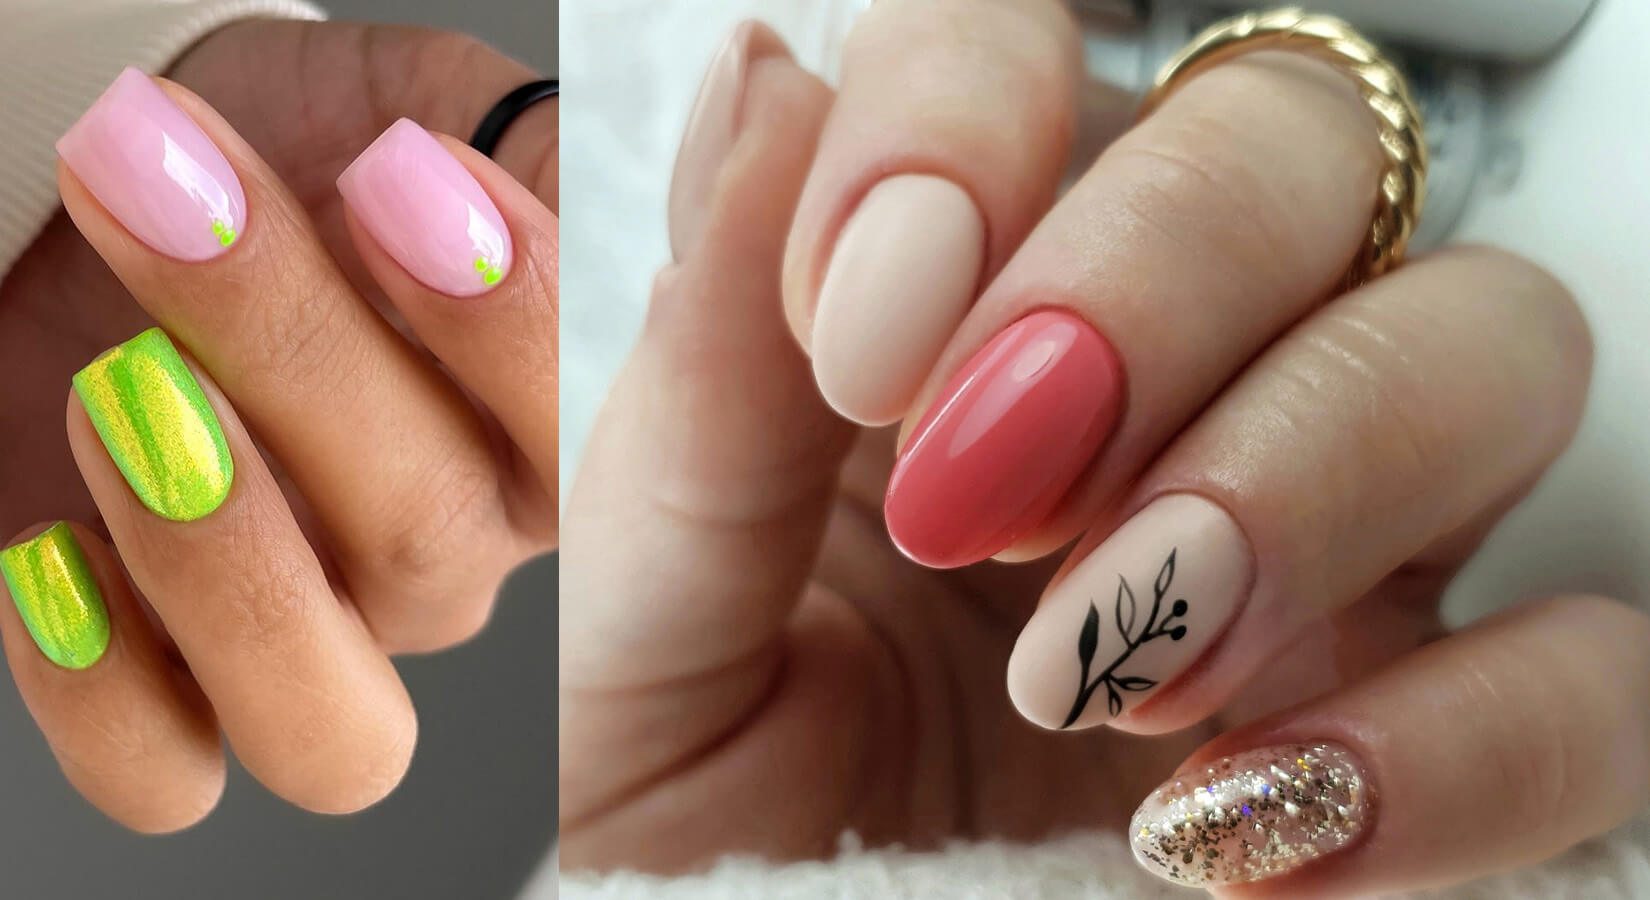 Short Nails - Embracing Simplicity with Chic Designs and Patterns